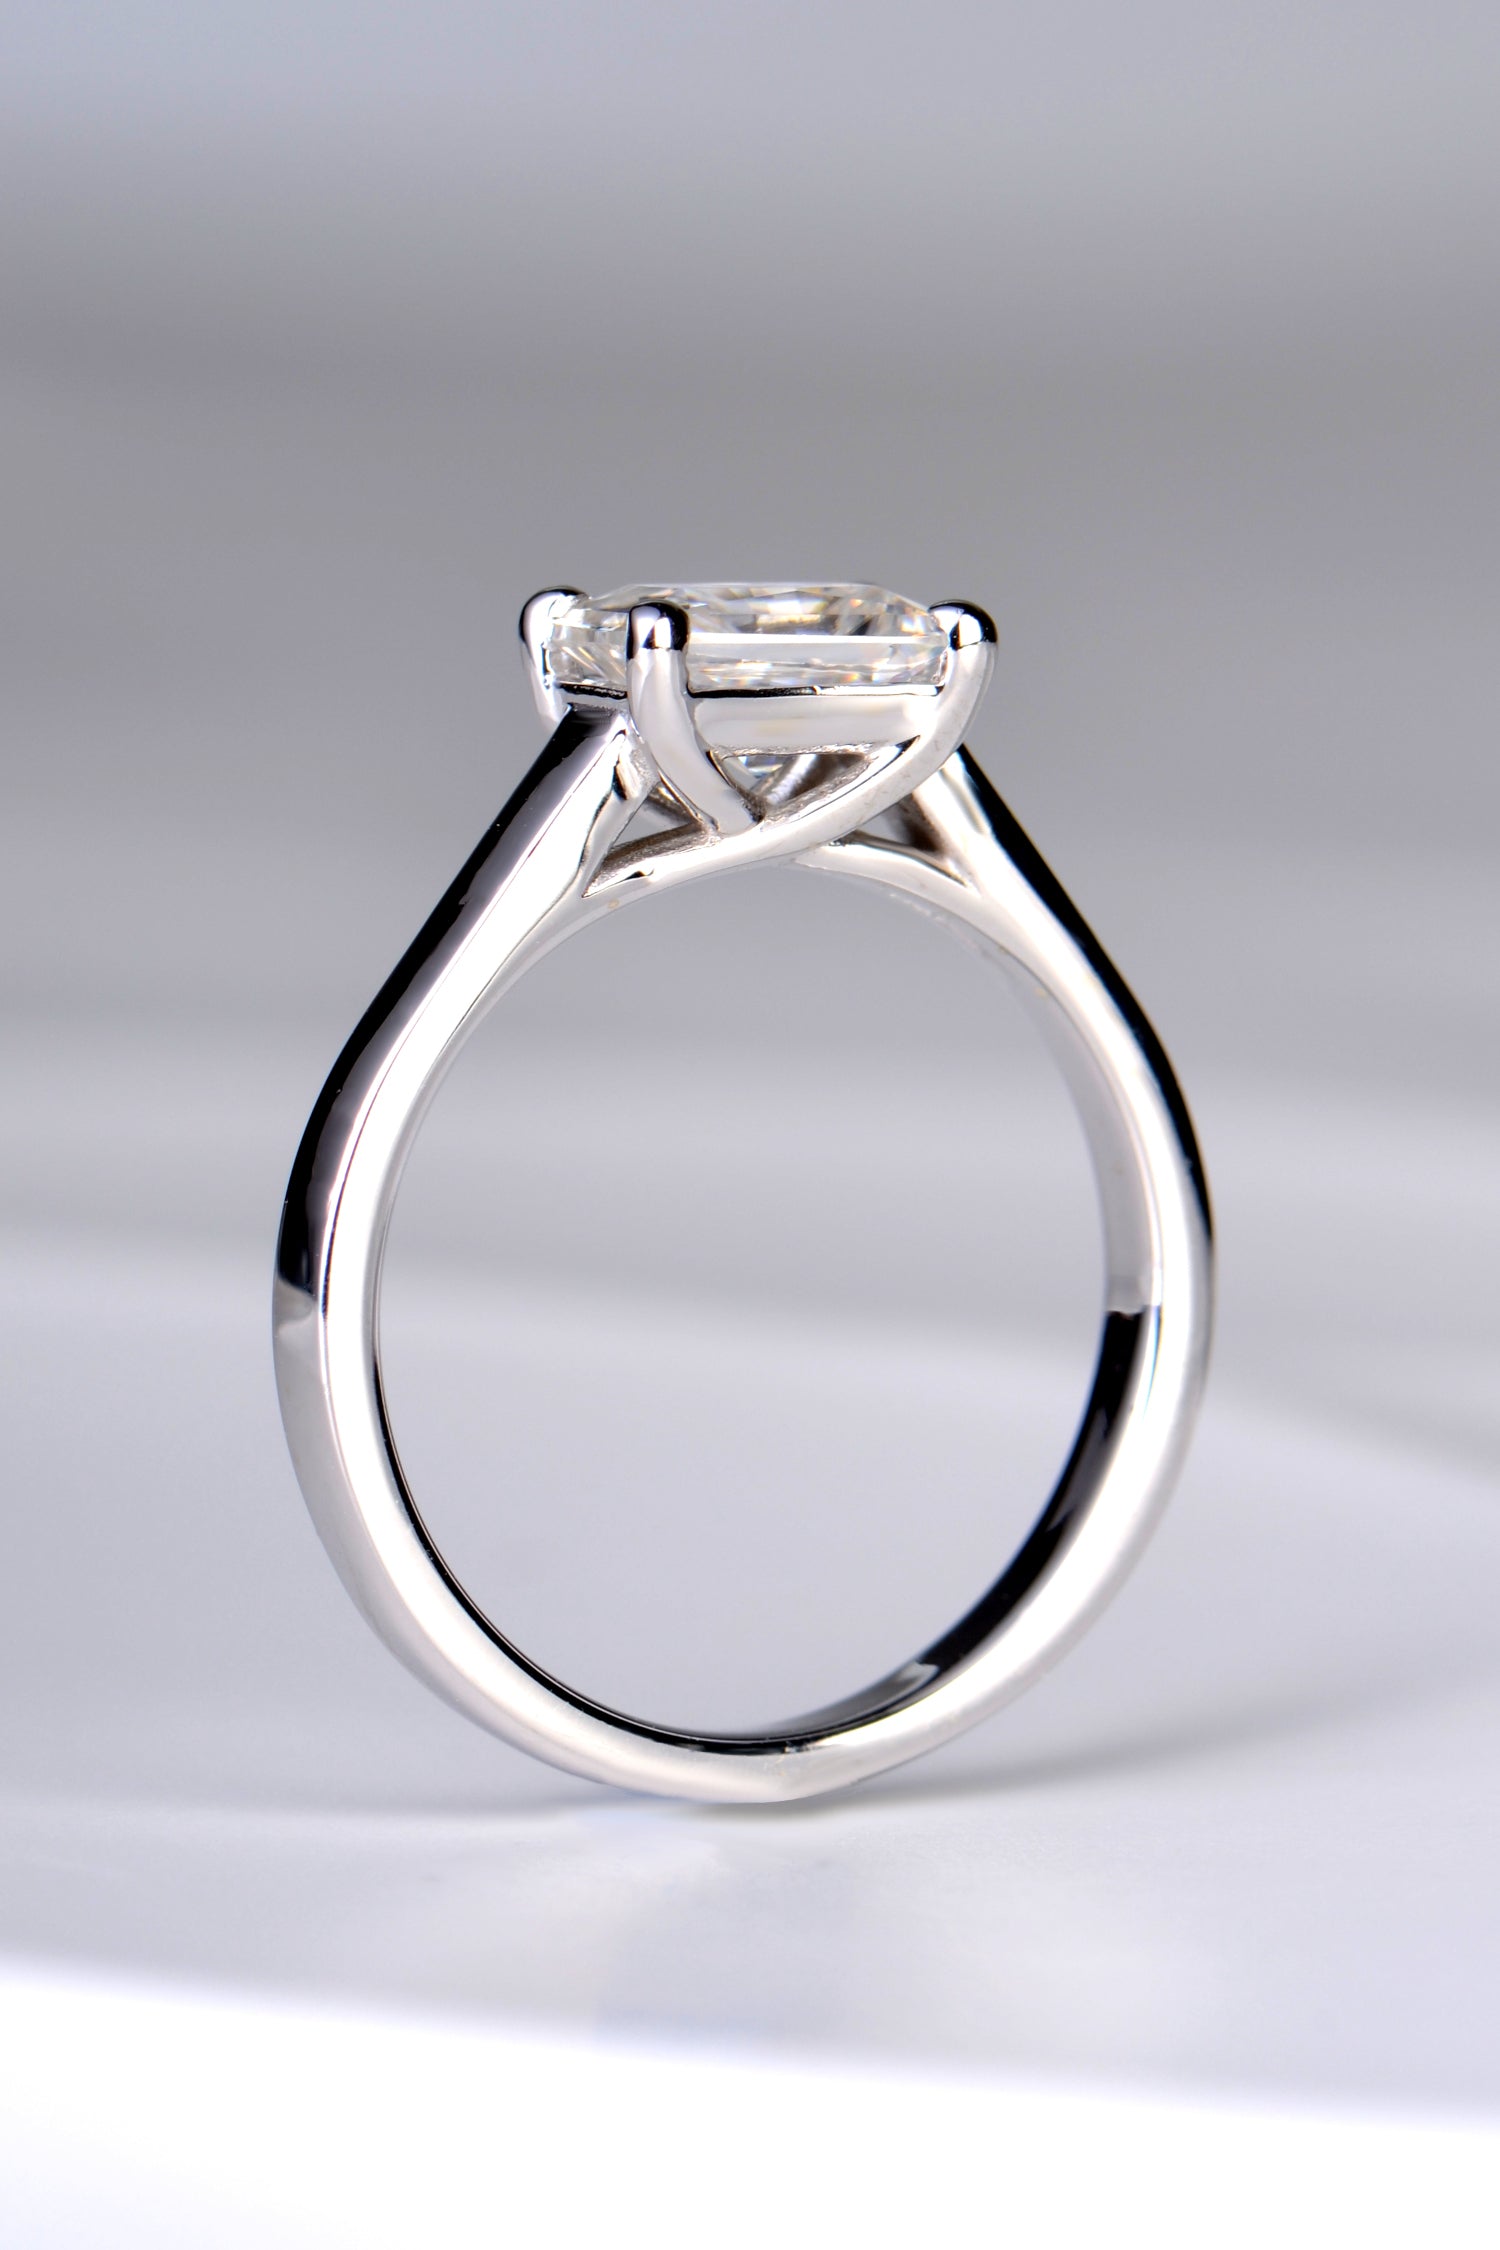 side view of the 7mm by 5mm rectangular moissanite ring showing a crossover design on the claws on the side of the ring which allow a straight band to sit next to it.